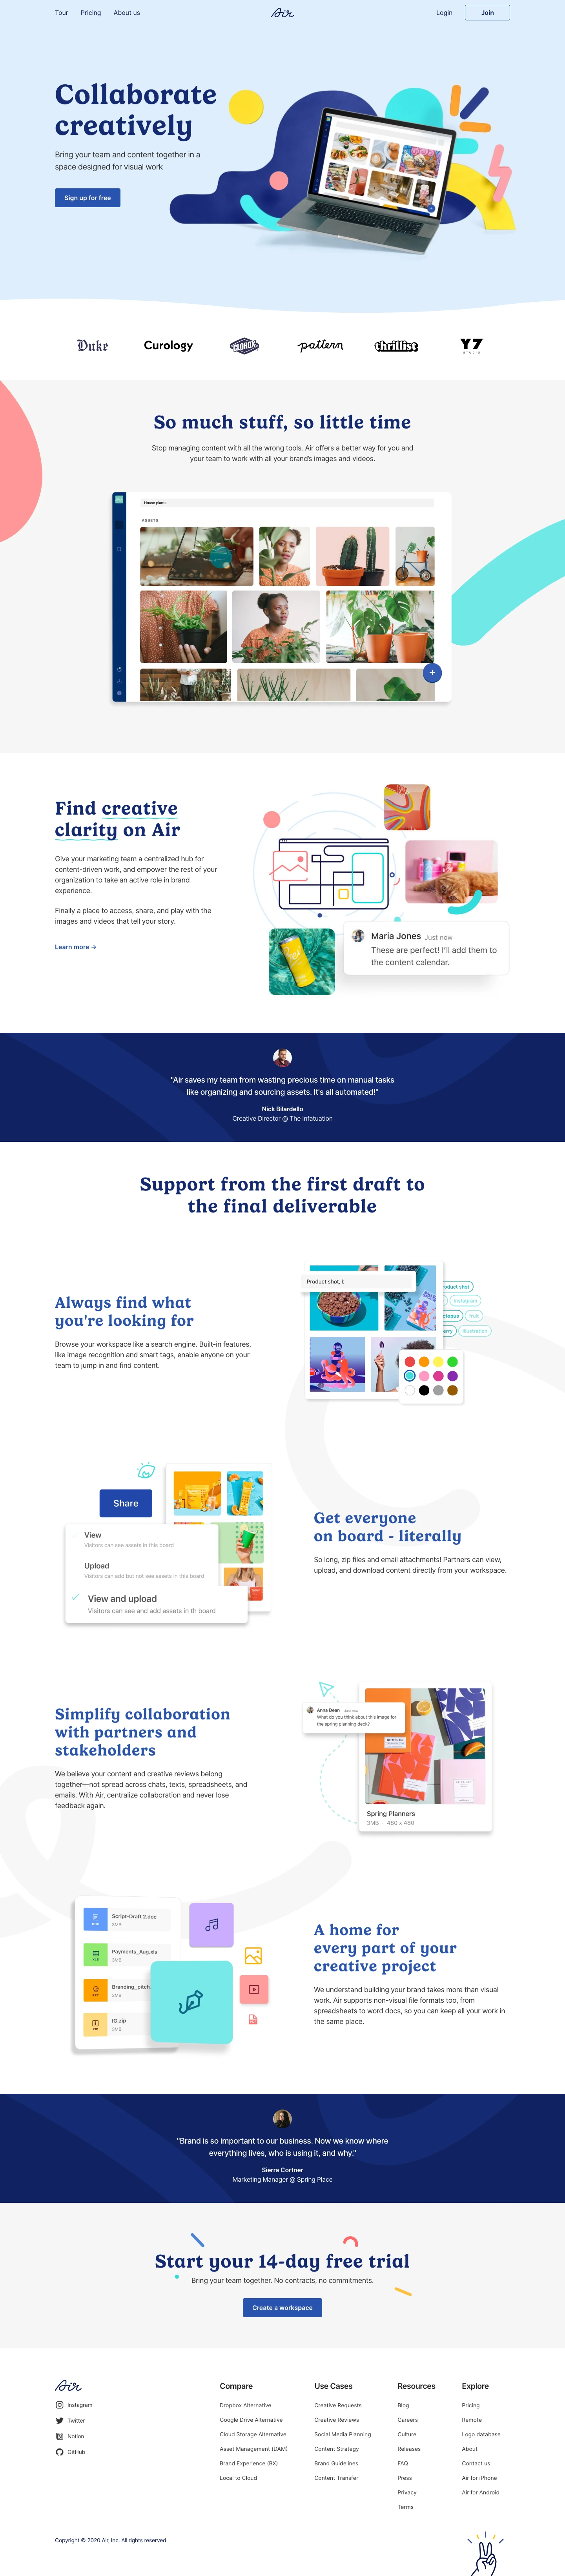 Air Landing Page Example: Collaborate creatively. Bring your team and content together in a space designed for visual work.